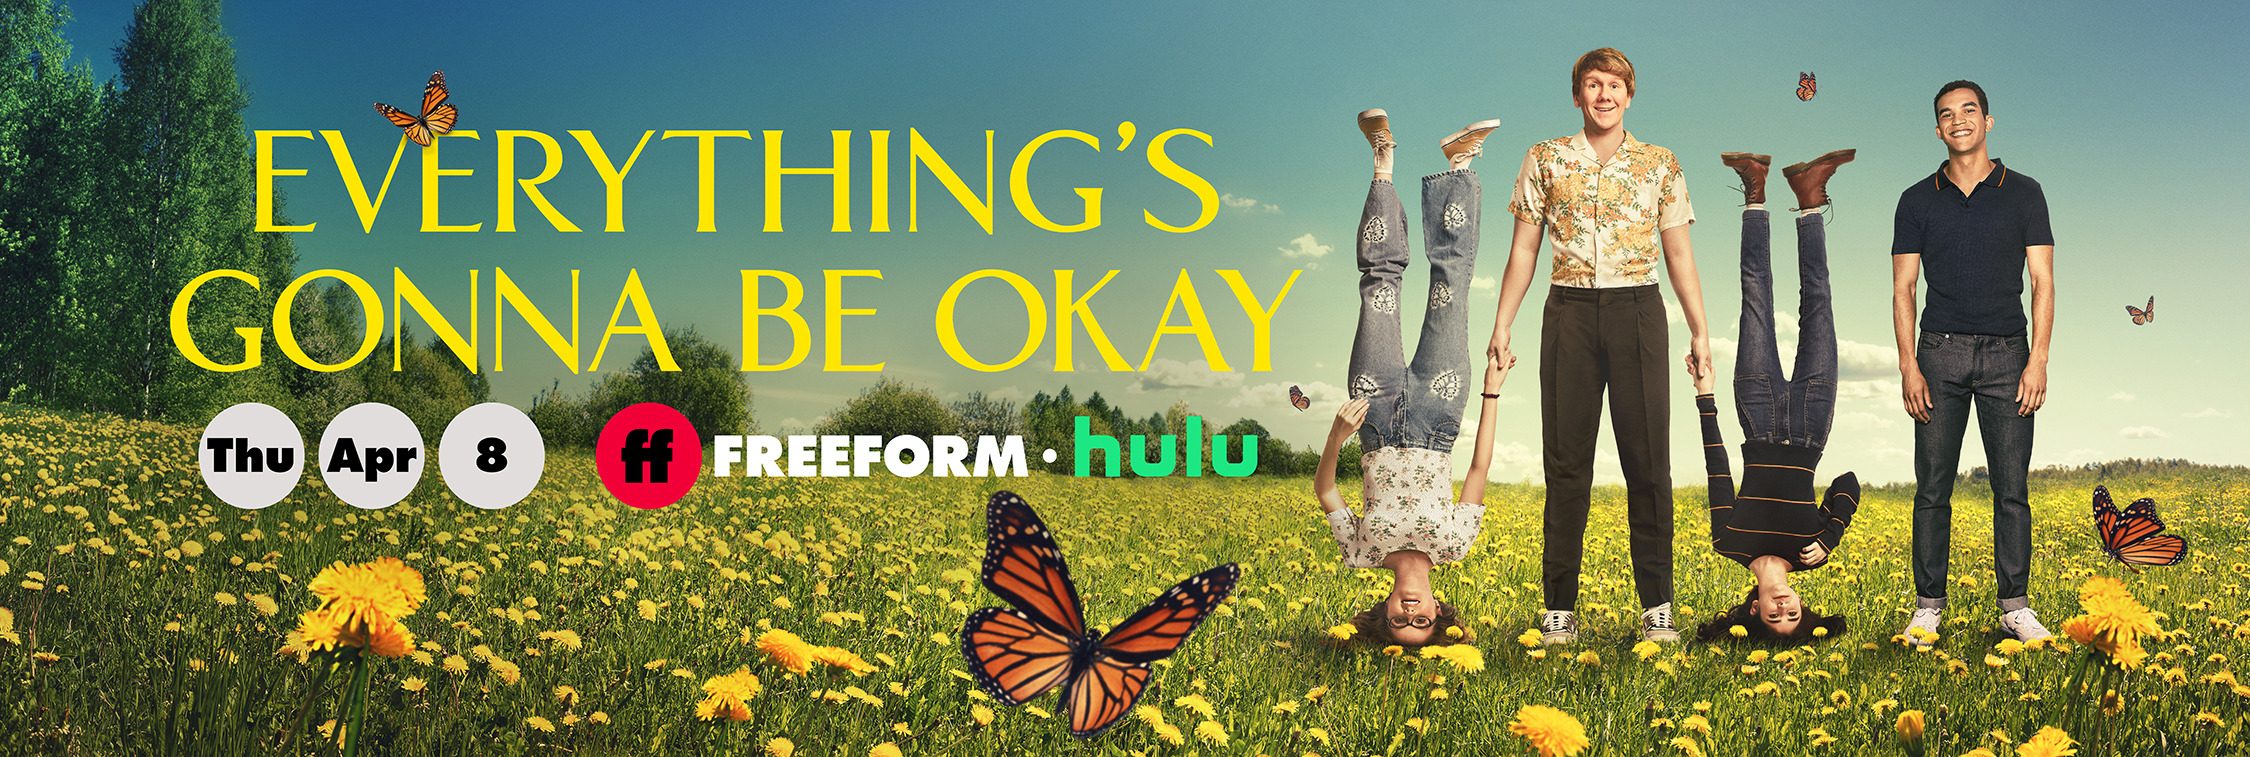 Mega Sized TV Poster Image for Everything's Gonna Be Okay (#7 of 8)